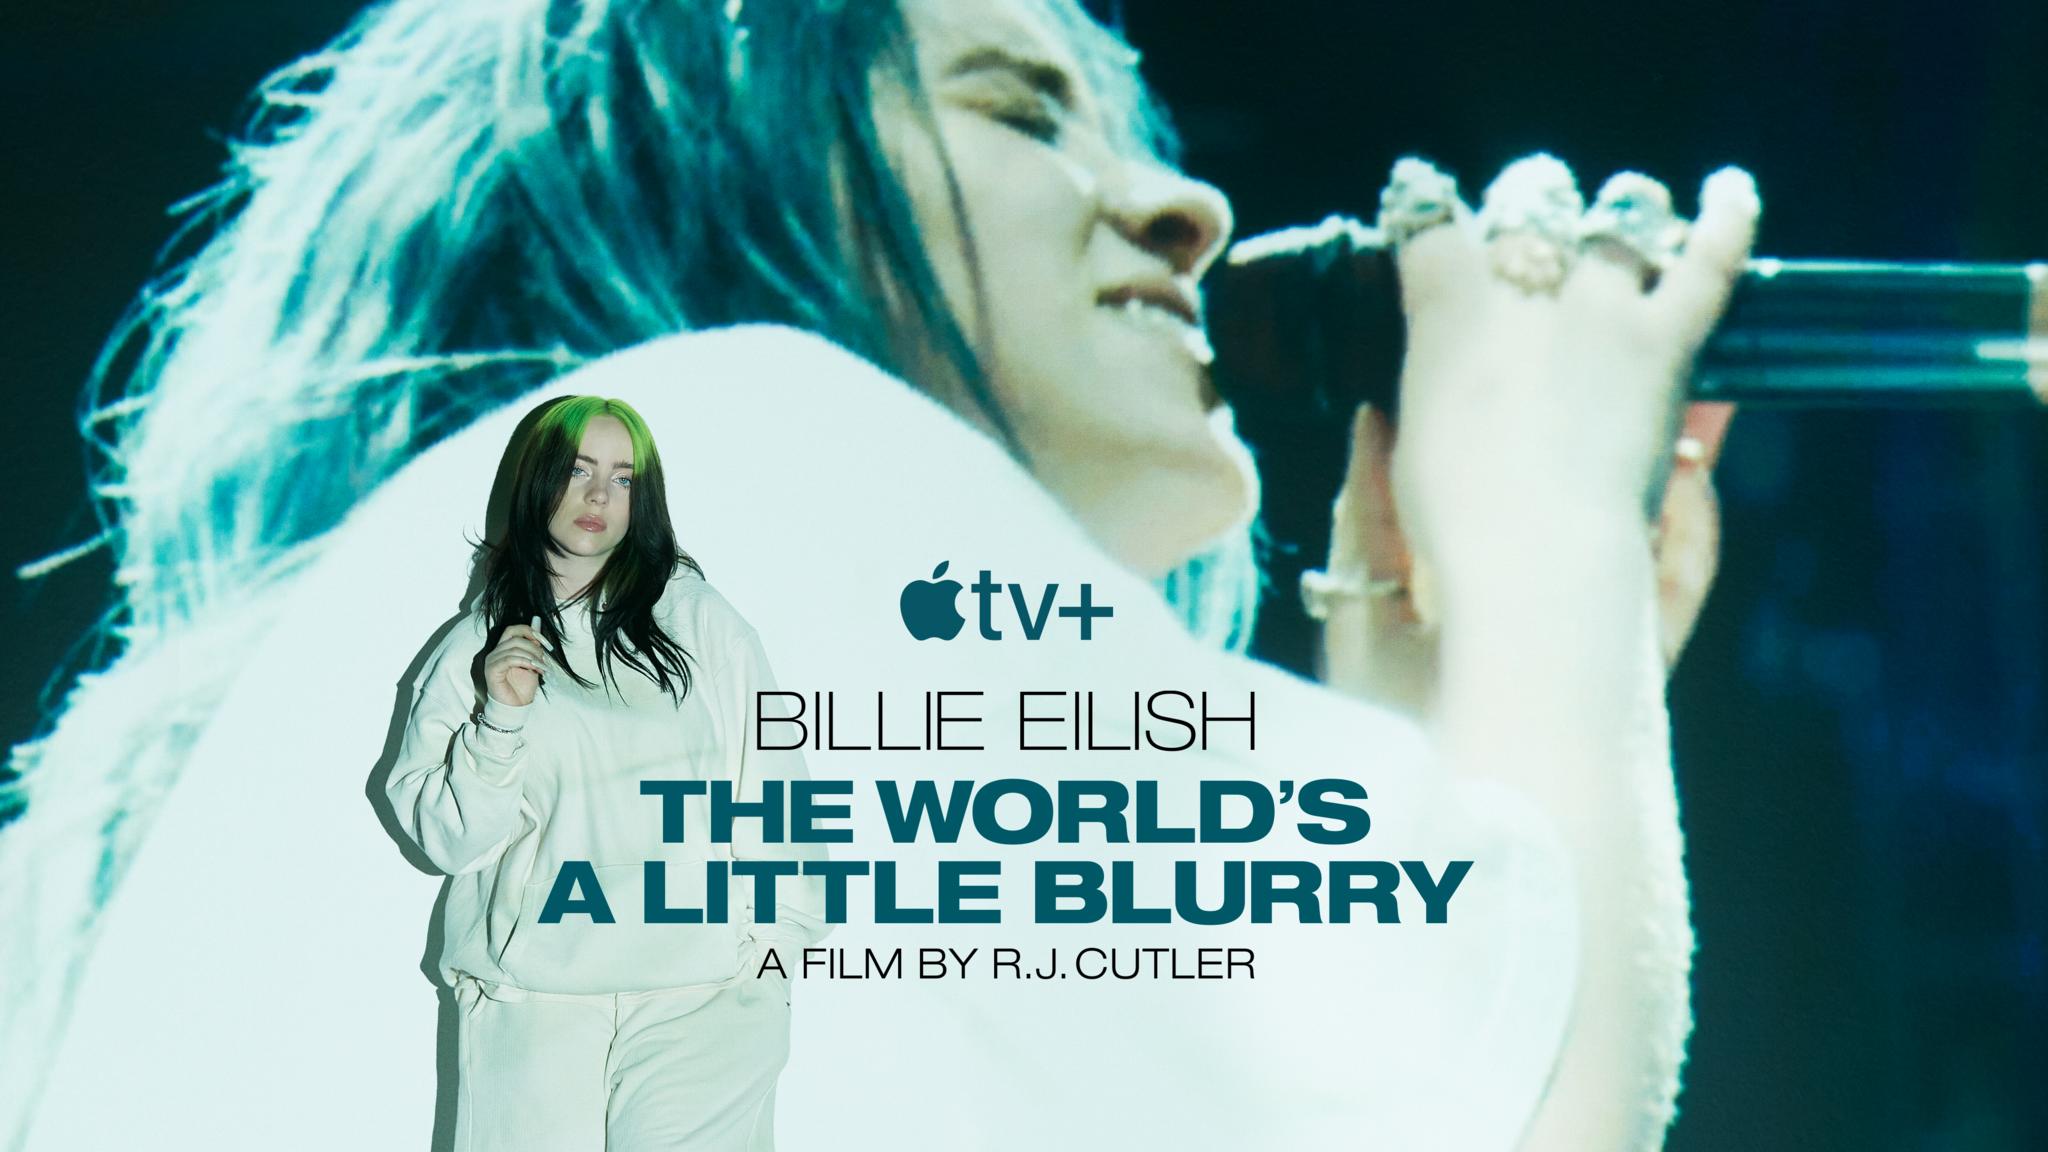 Billie Eilish: The World's A Little Blurry' is now available on Apple TV+ |  iMore